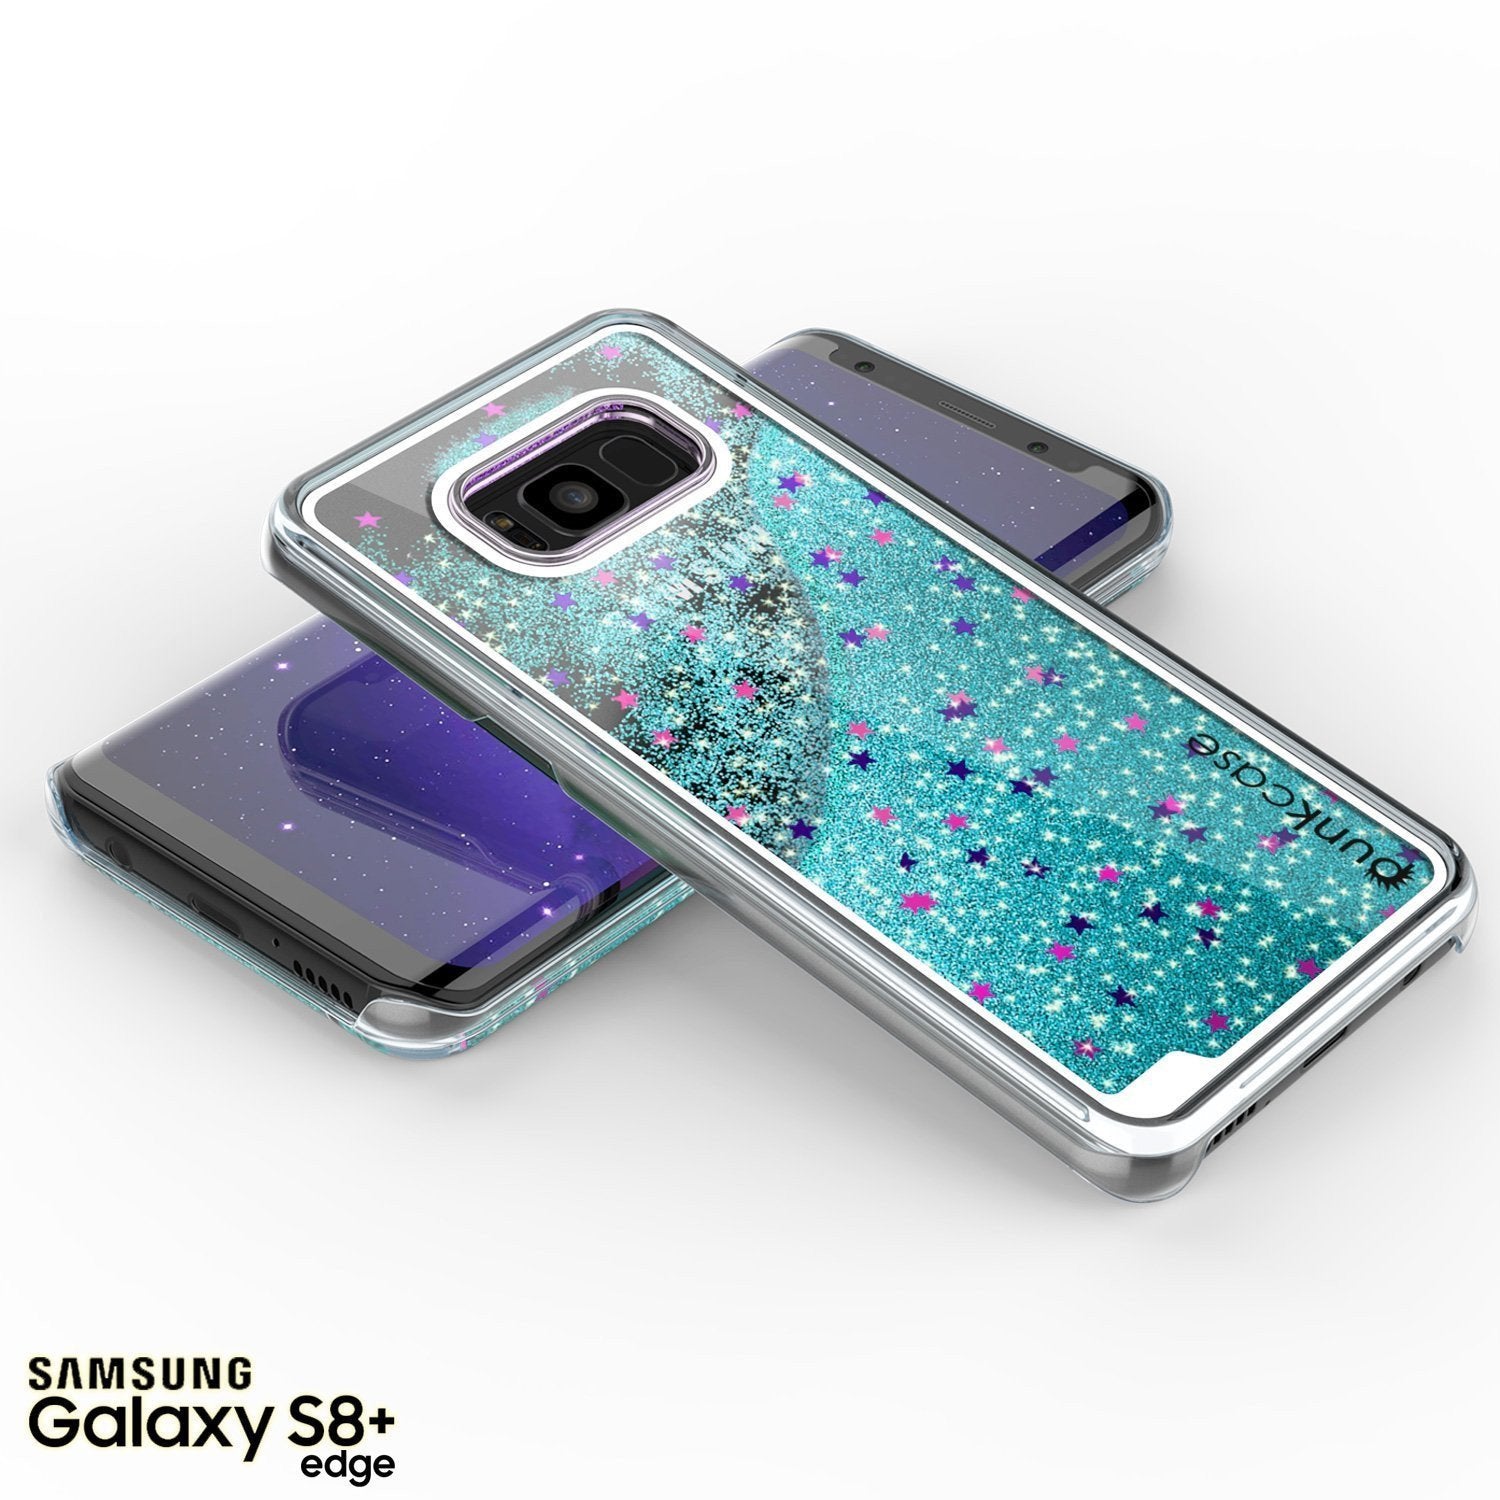 S8 Plus Case, Punkcase [Liquid Series] Protective Dual Layer Floating Glitter Cover with lots of Bling & Sparkle + PunkShield Screen Protector for Samsungs Galaxy S8+ [Teal] - PunkCase NZ